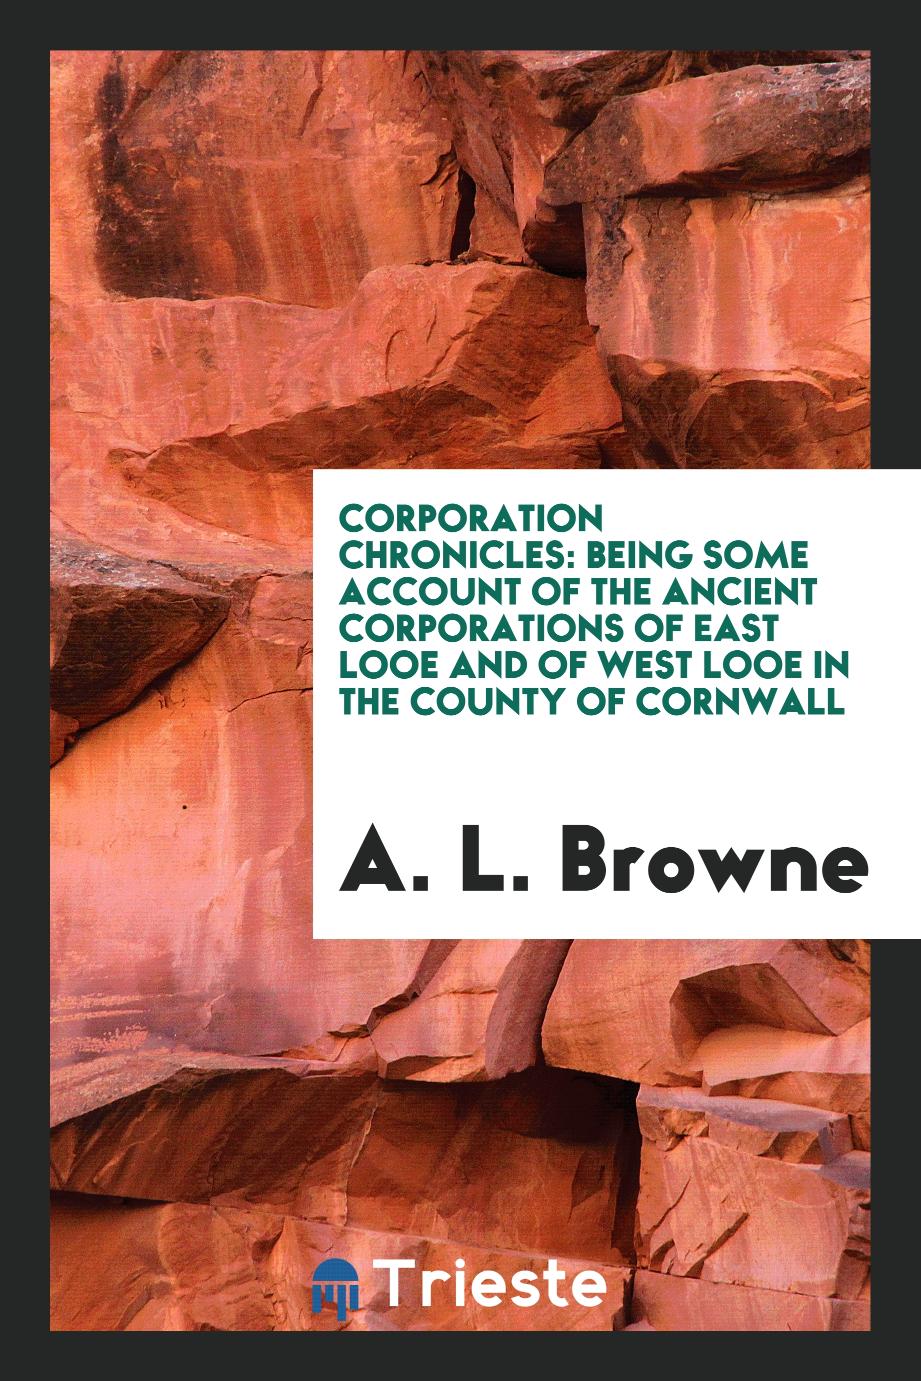 Corporation Chronicles: Being Some Account of the Ancient Corporations of East Looe and of West Looe in the County of Cornwall